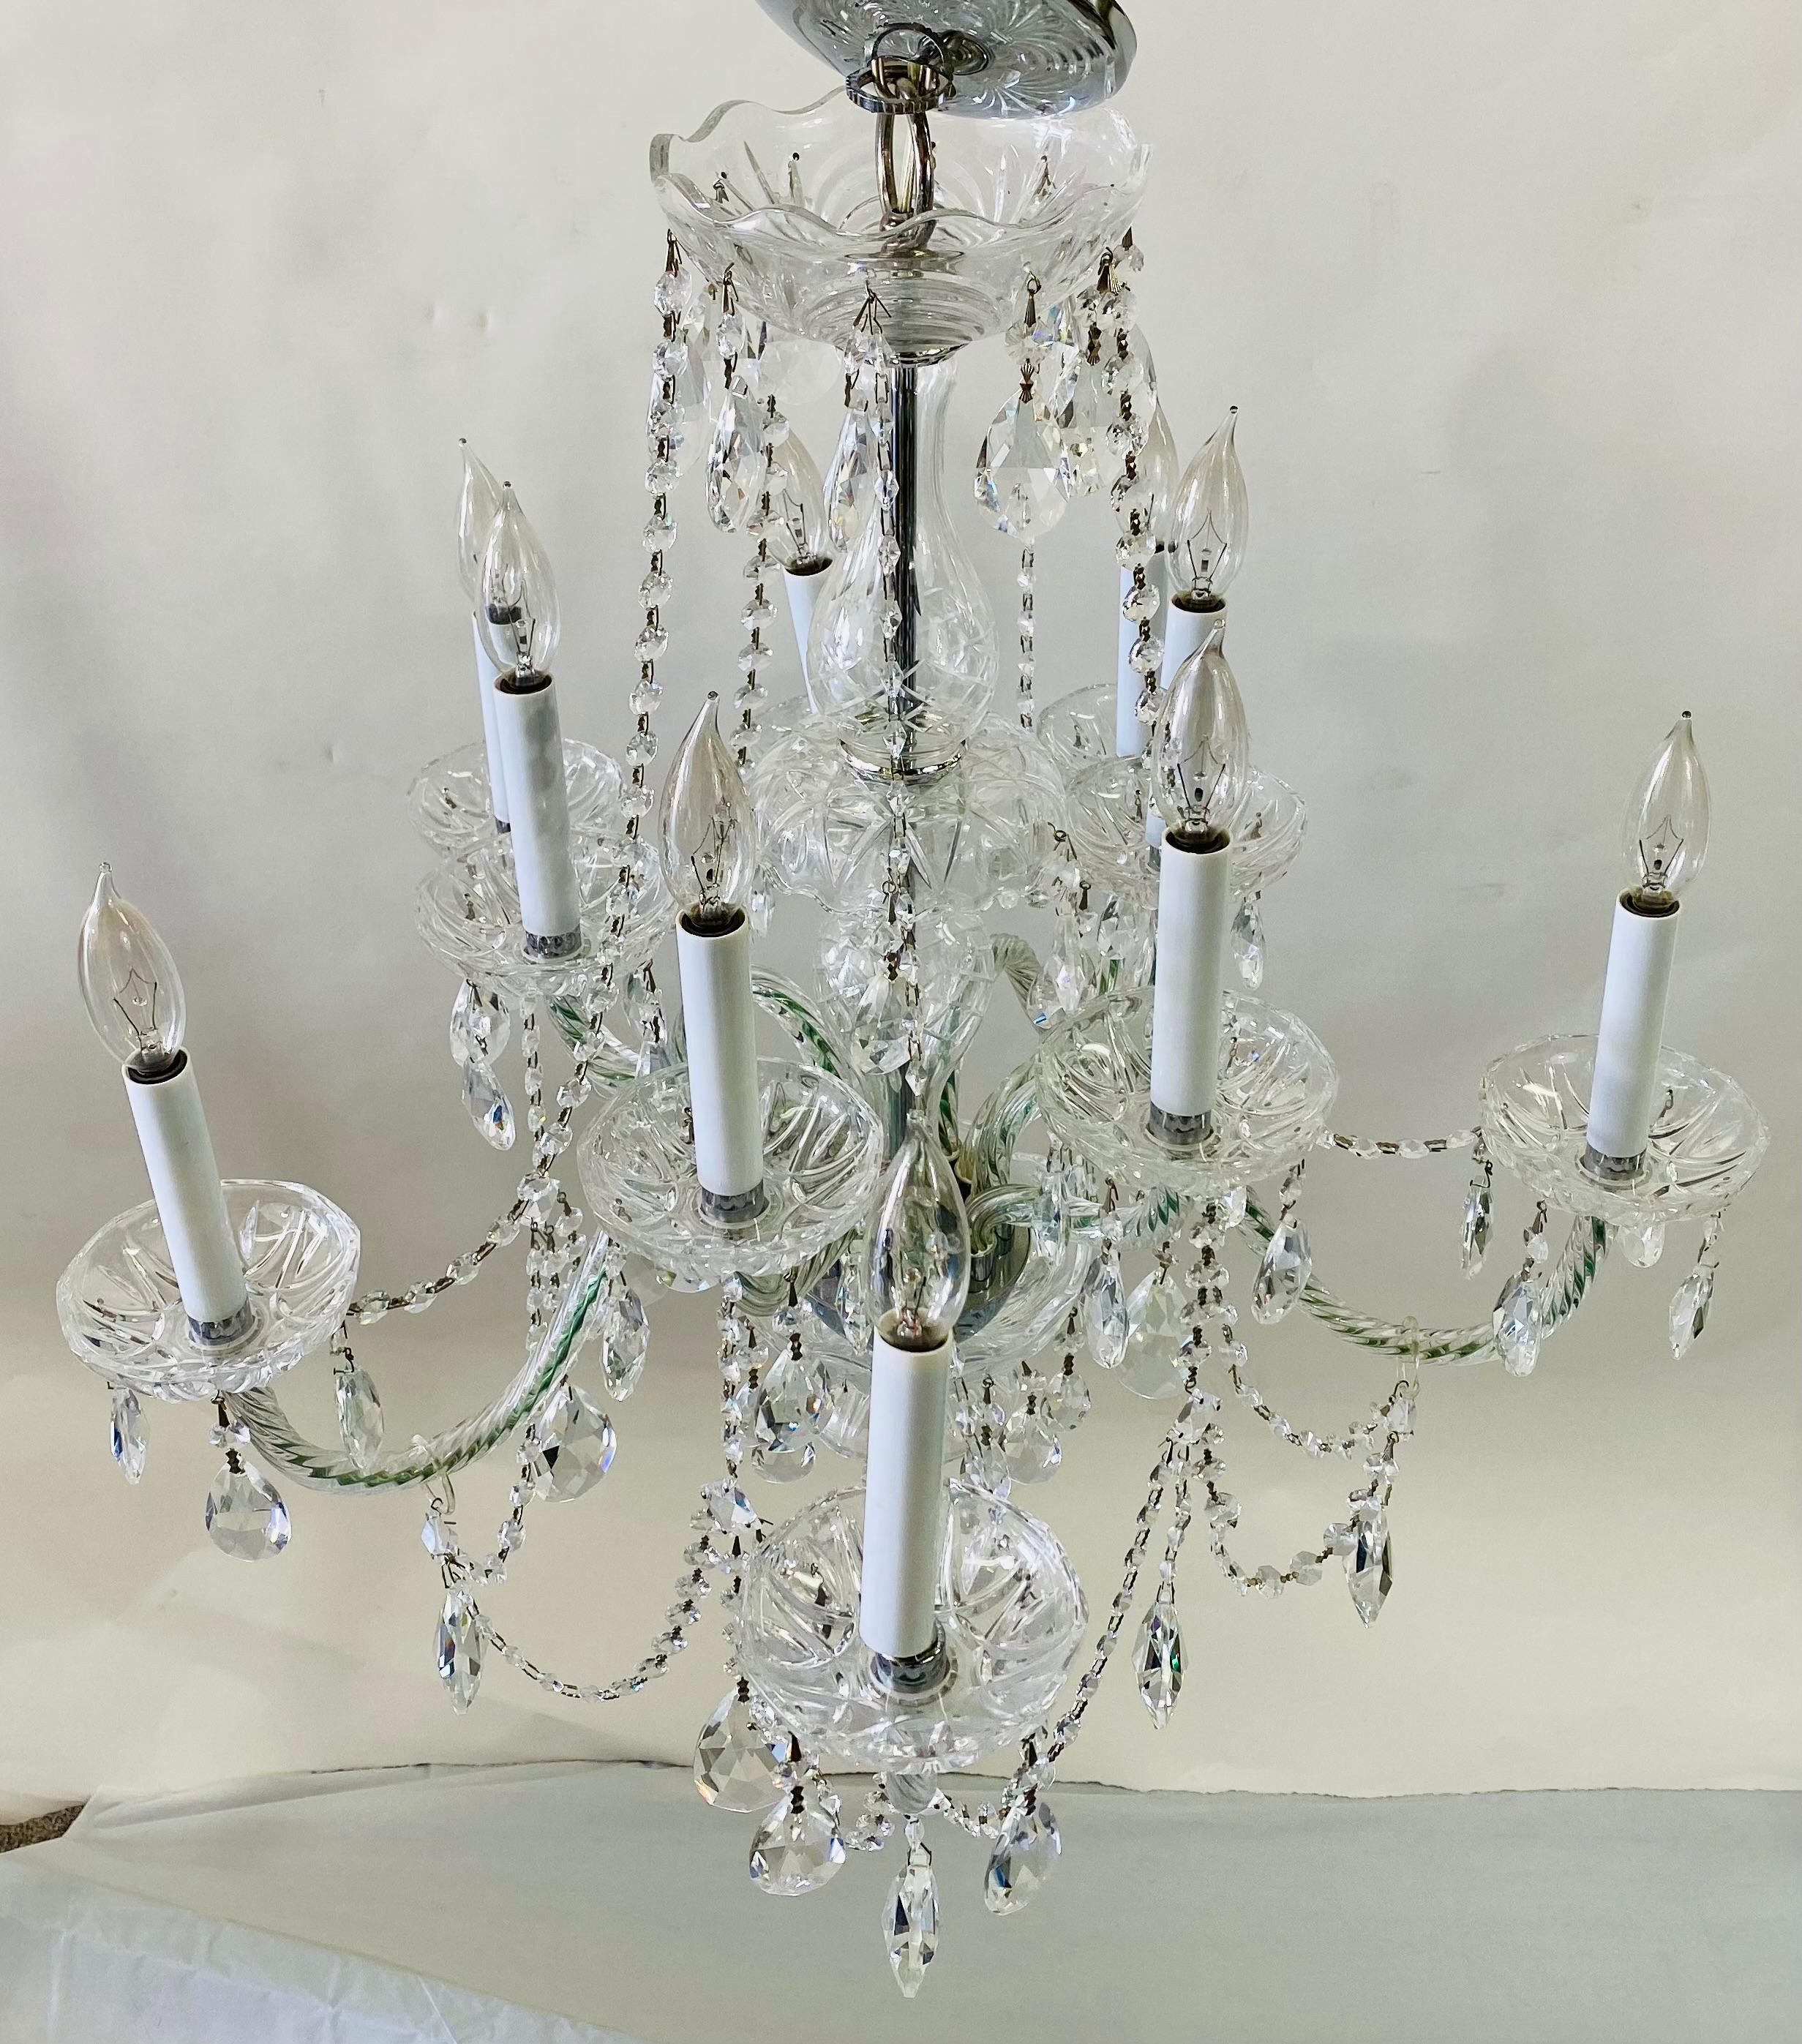 An elegant Art Deco crystal chandelier in the manner of Waterford. The chandelier features 10 arms and take 10 candelabra bulbs. The finely cut crystal prisms hang from a double bobeche candle drip. This chandelier will  add class and sophistication